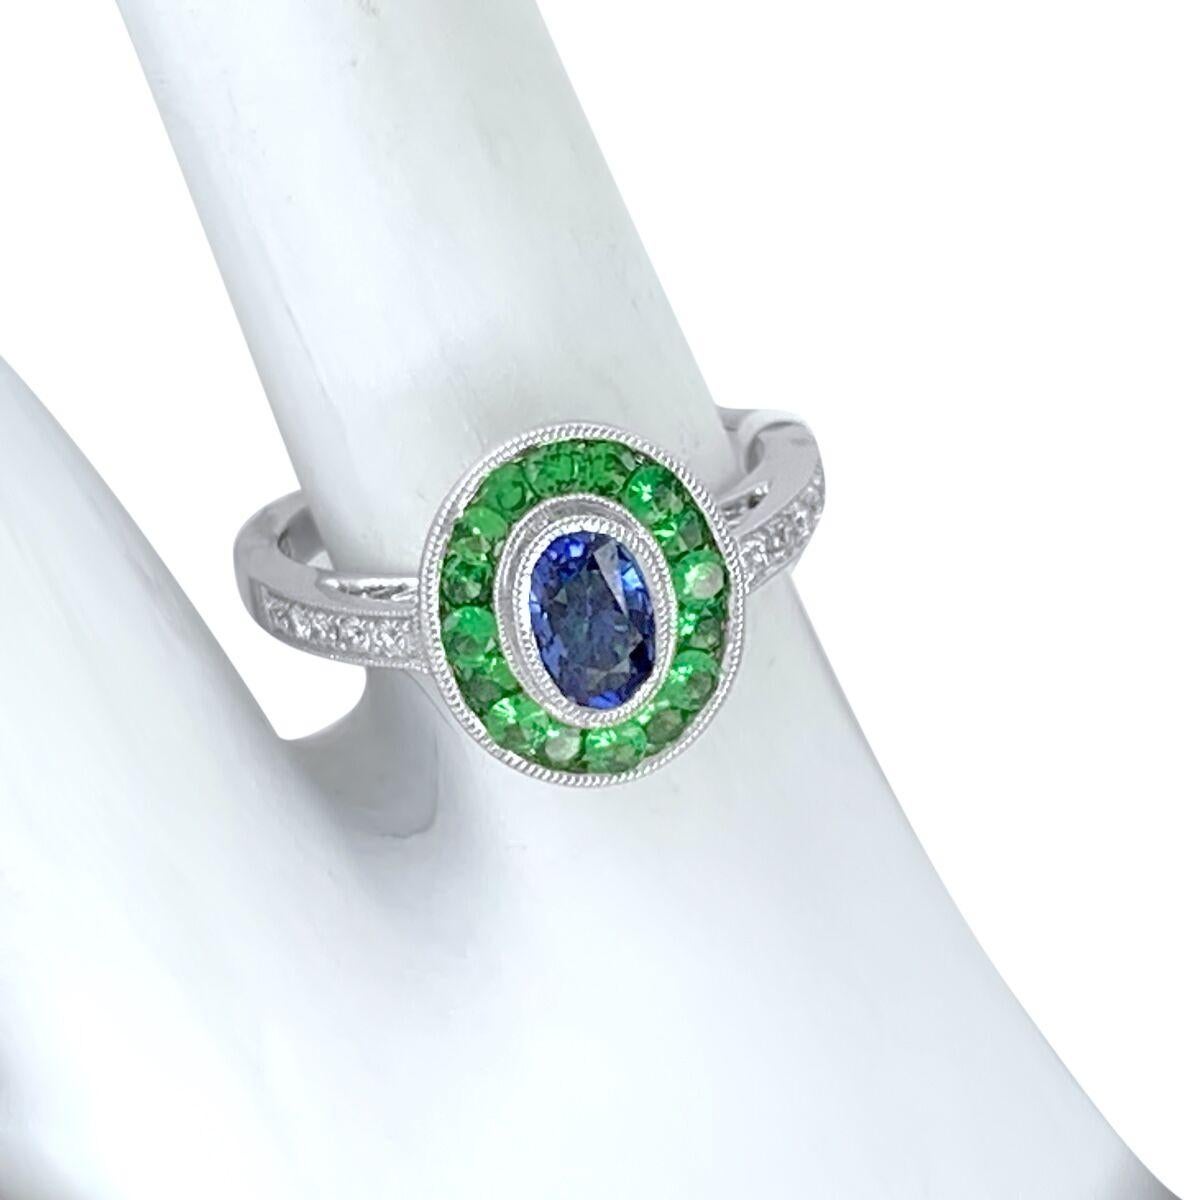 Art Deco at its best, using French calibre cut Precious Gemstones.

New World Technology meets Old World Styles!

Material: 14k White Gold
Hallmark: 14K JH
Ring Size: 6.5 
Gemstone: Sapphire/ Tsavorite and Diamond
Sapphire Weight: 1.07